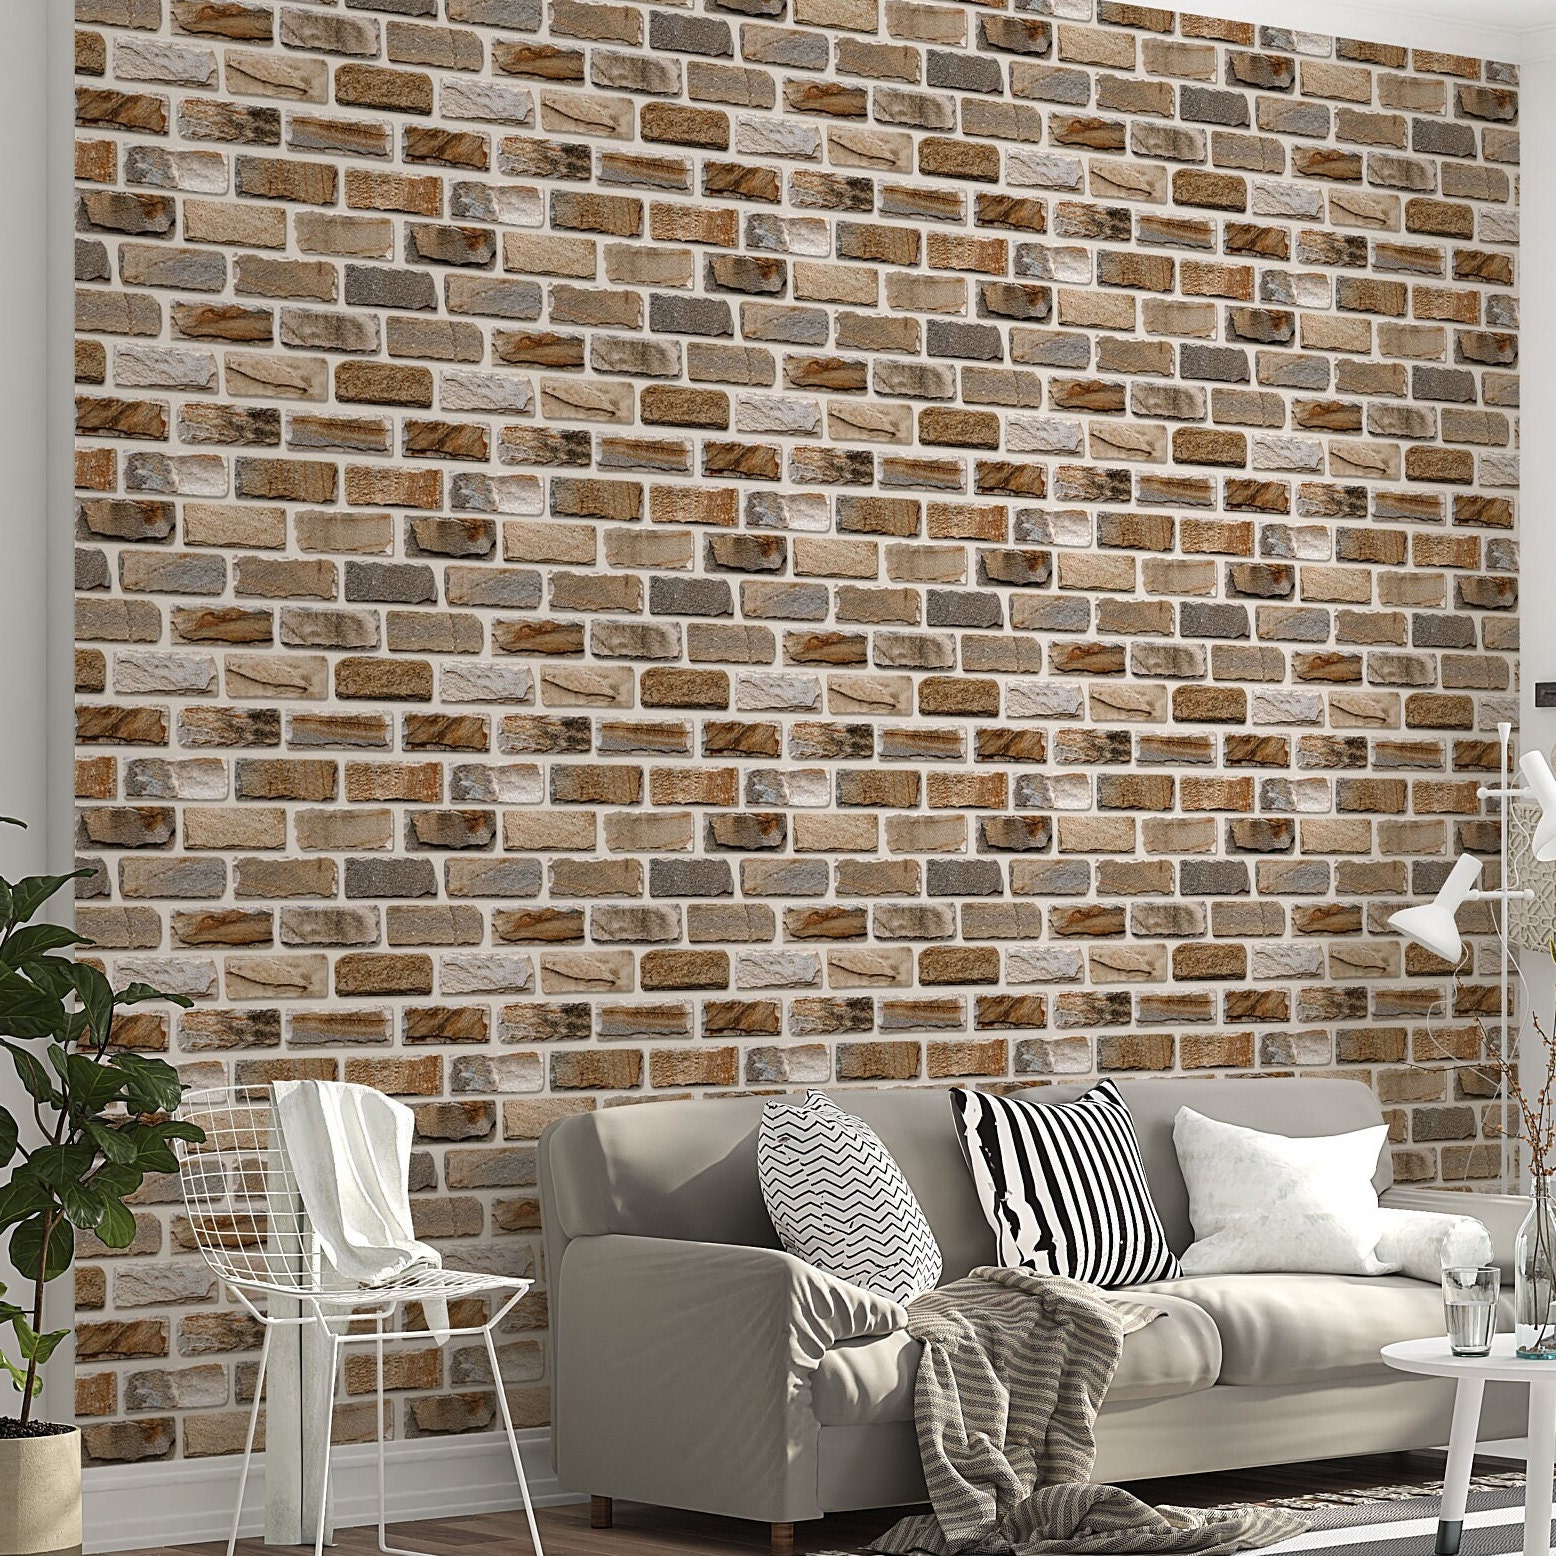 Plain Faux Brick Wall Decal Horizontal Panel Mural Peel & Stick Graphic  Removable Wallpaper DIY Home Decor Industrial Style 24 X 48 Inches 